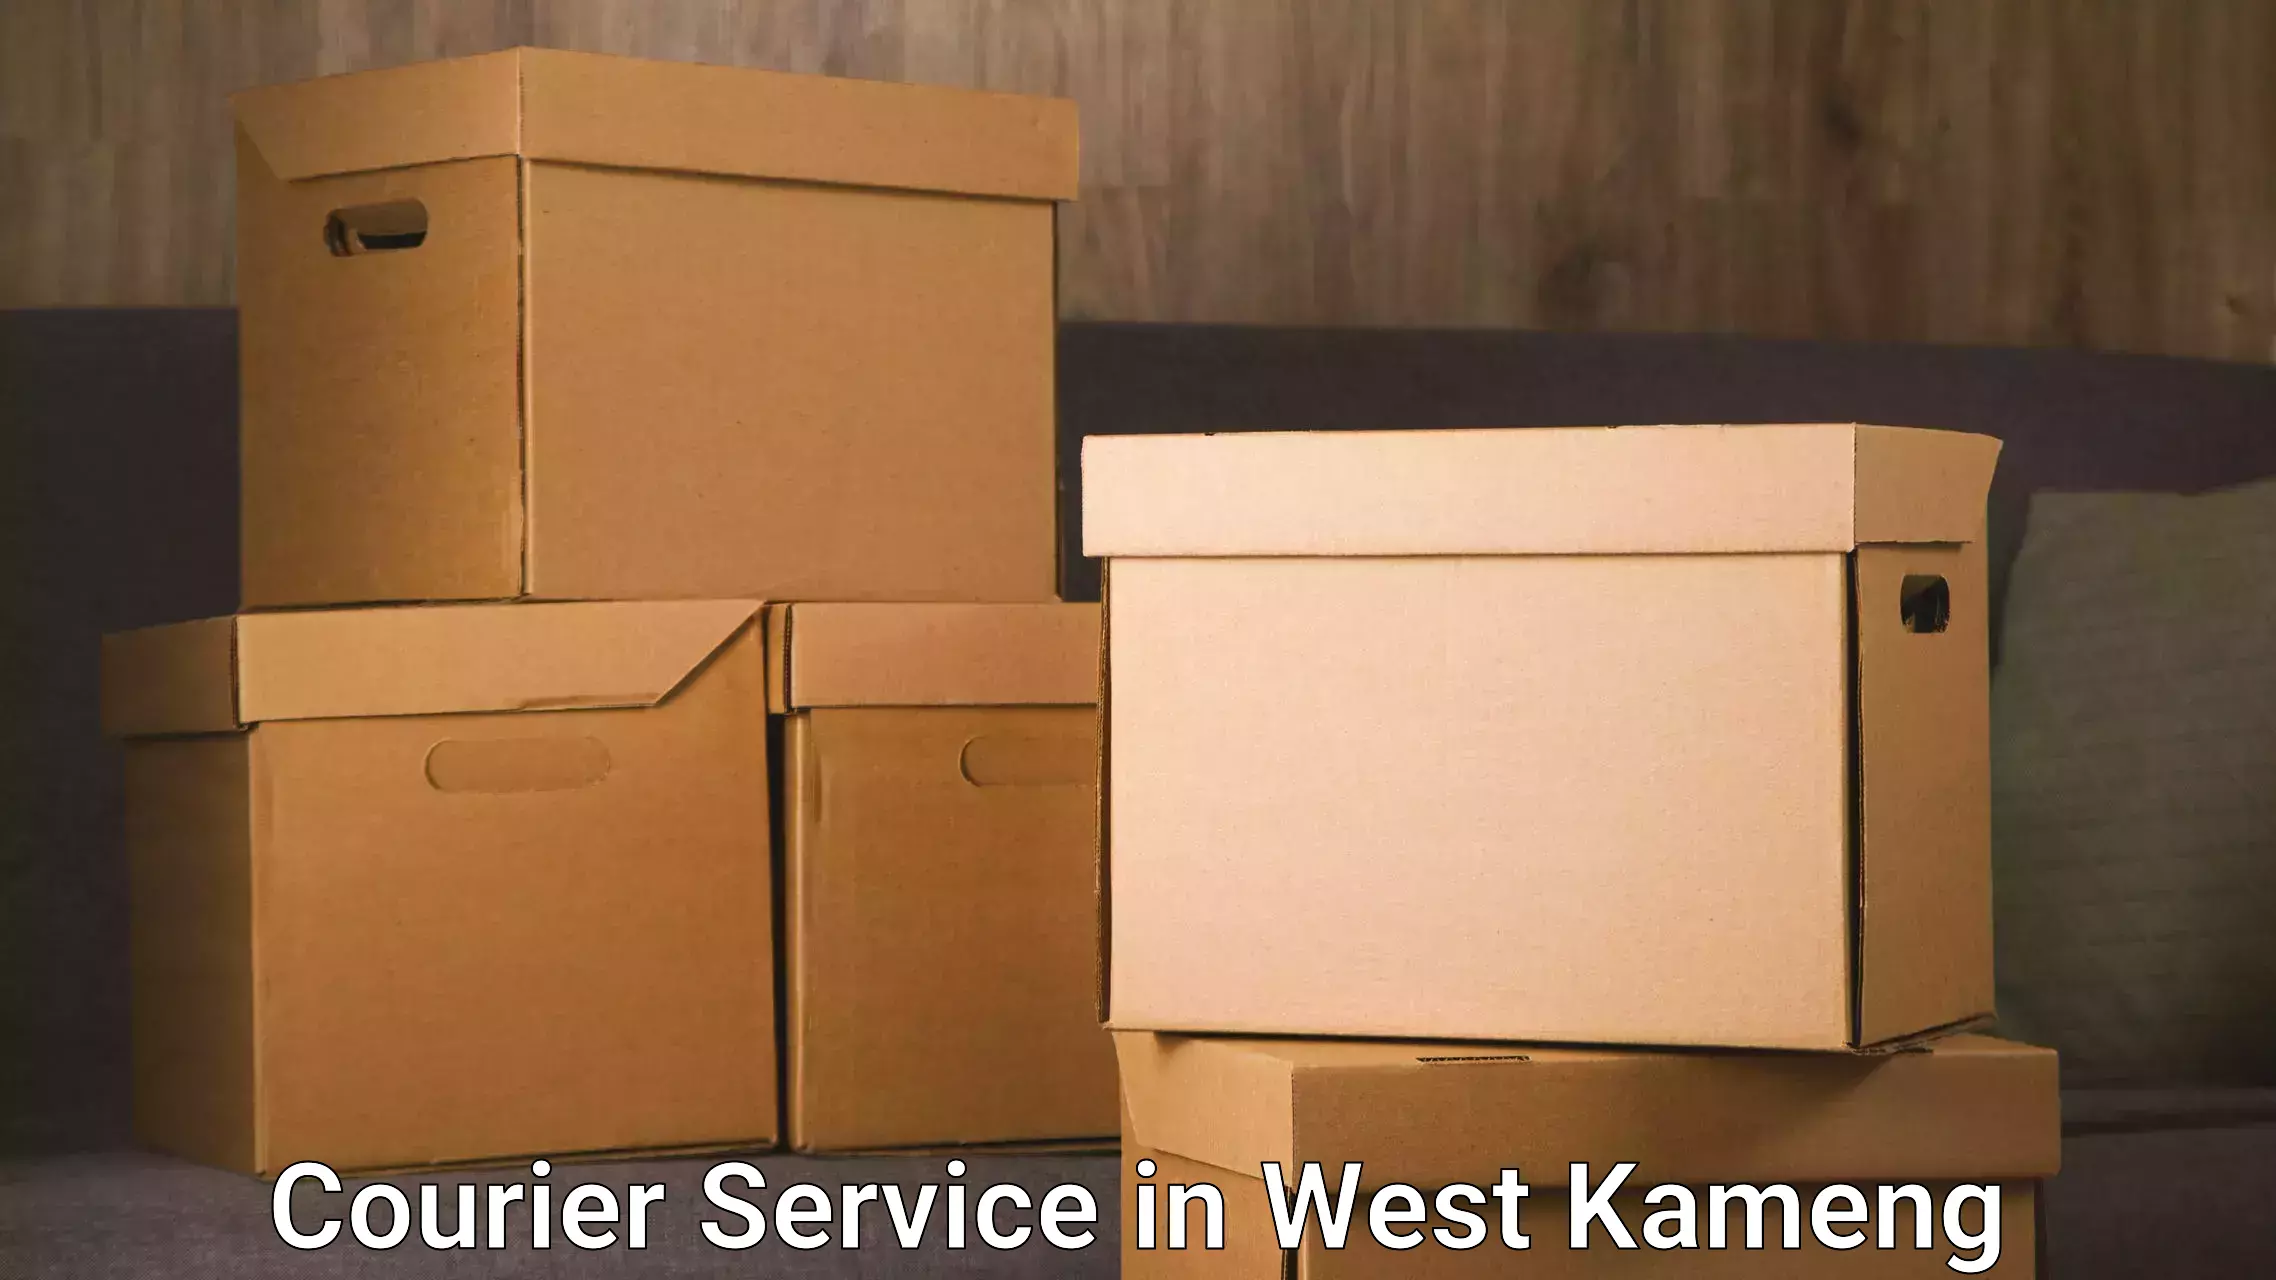 Fast delivery service in West Kameng